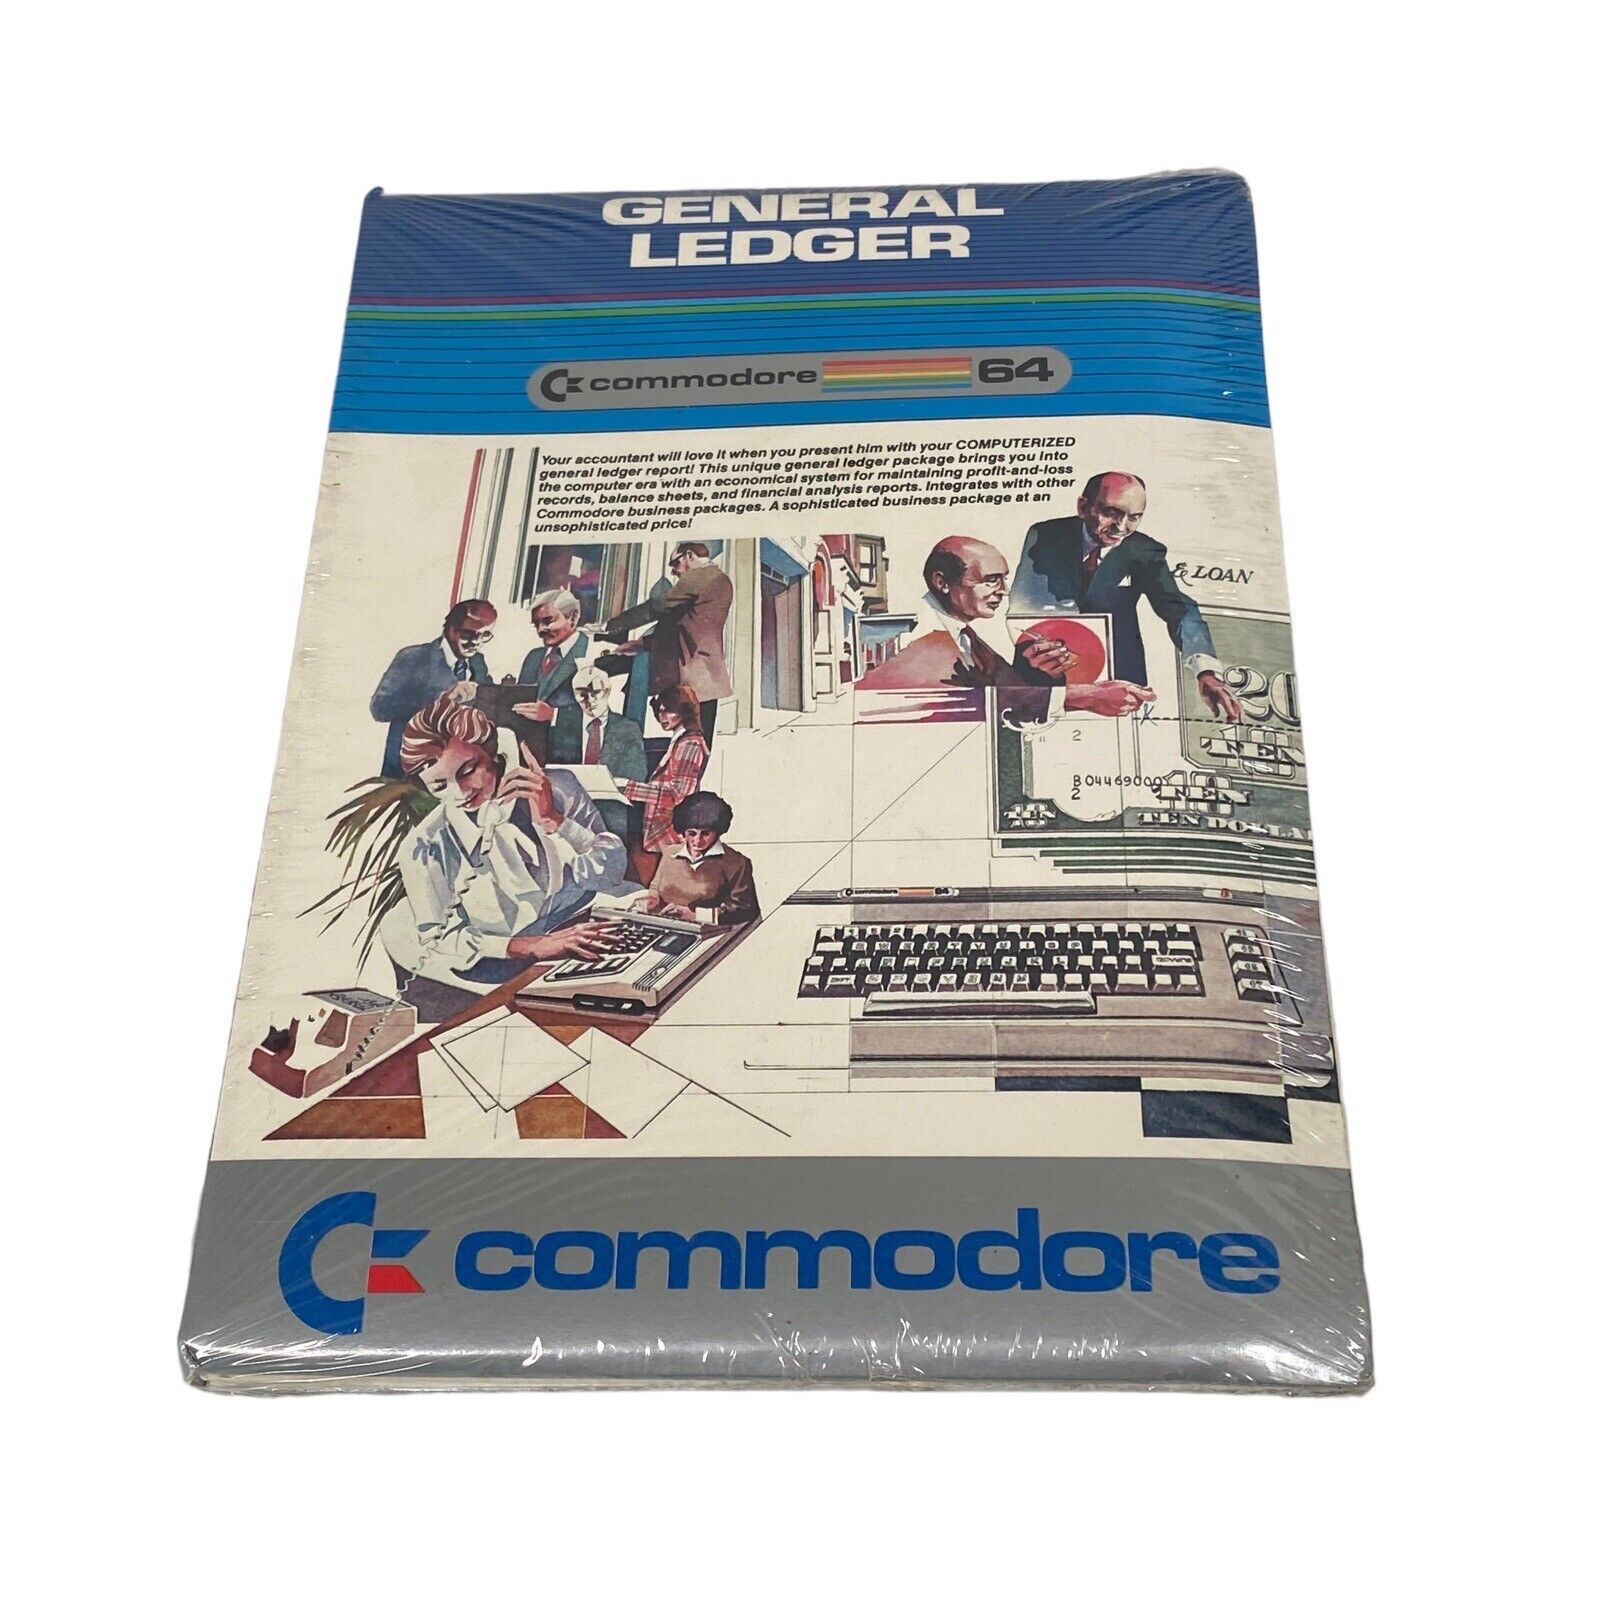 VTG 1984 GENERAL LEDGER FOR COMMODORE 64 DISK ACCOUNTING SOFTWARE SEALED NOS